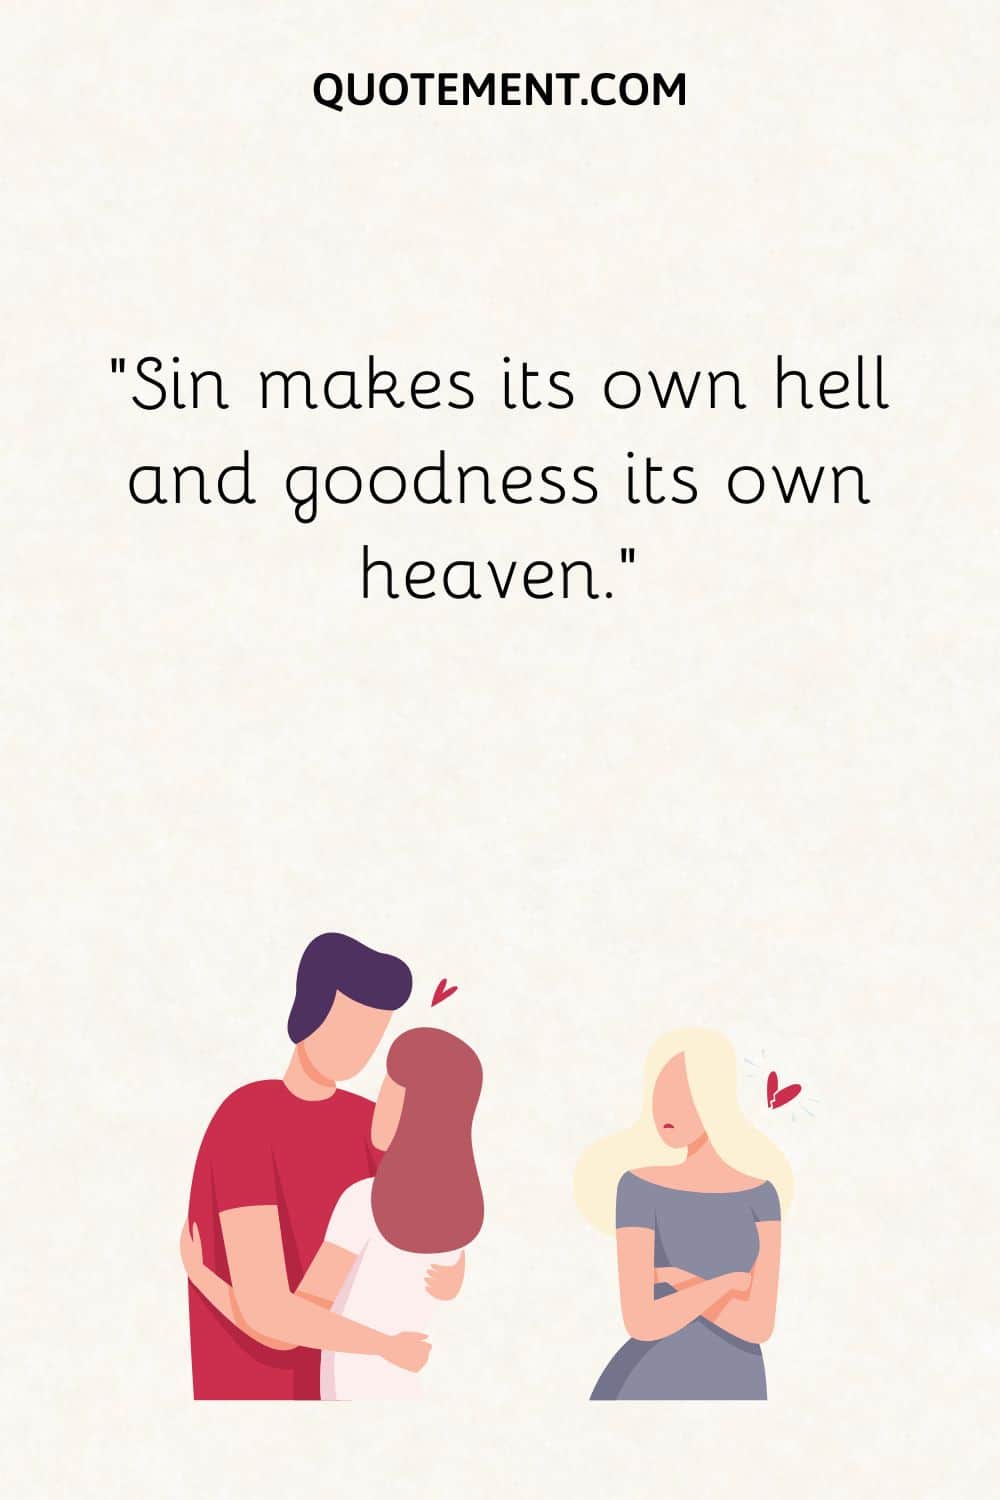 Sin makes its own hell and goodness its own heaven